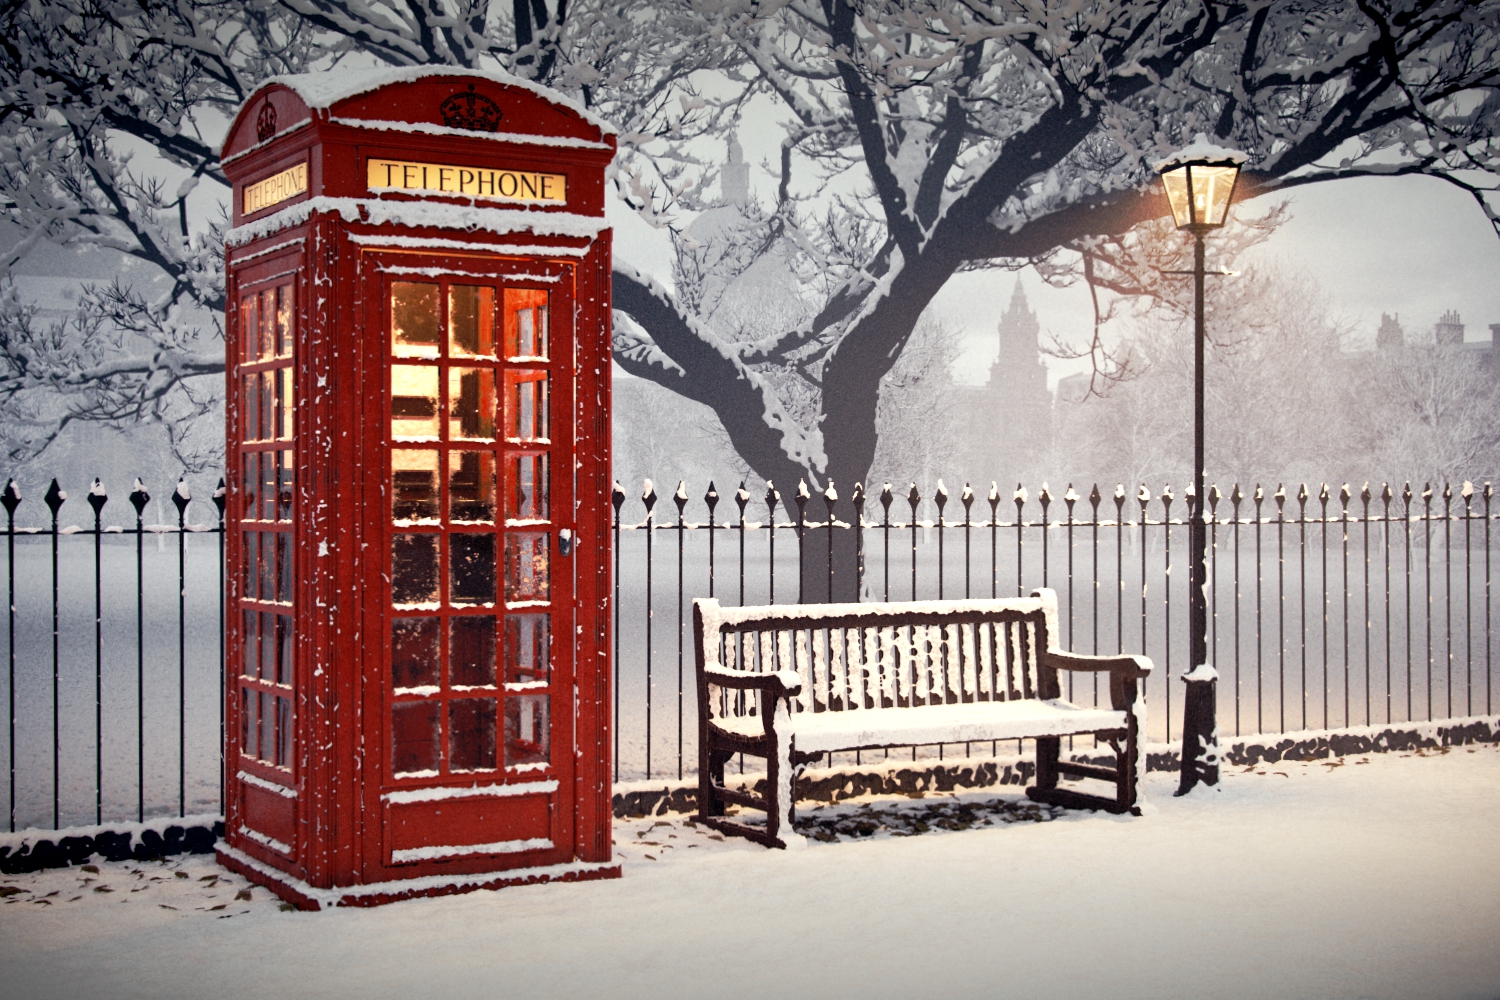 London scene with snow during daylight